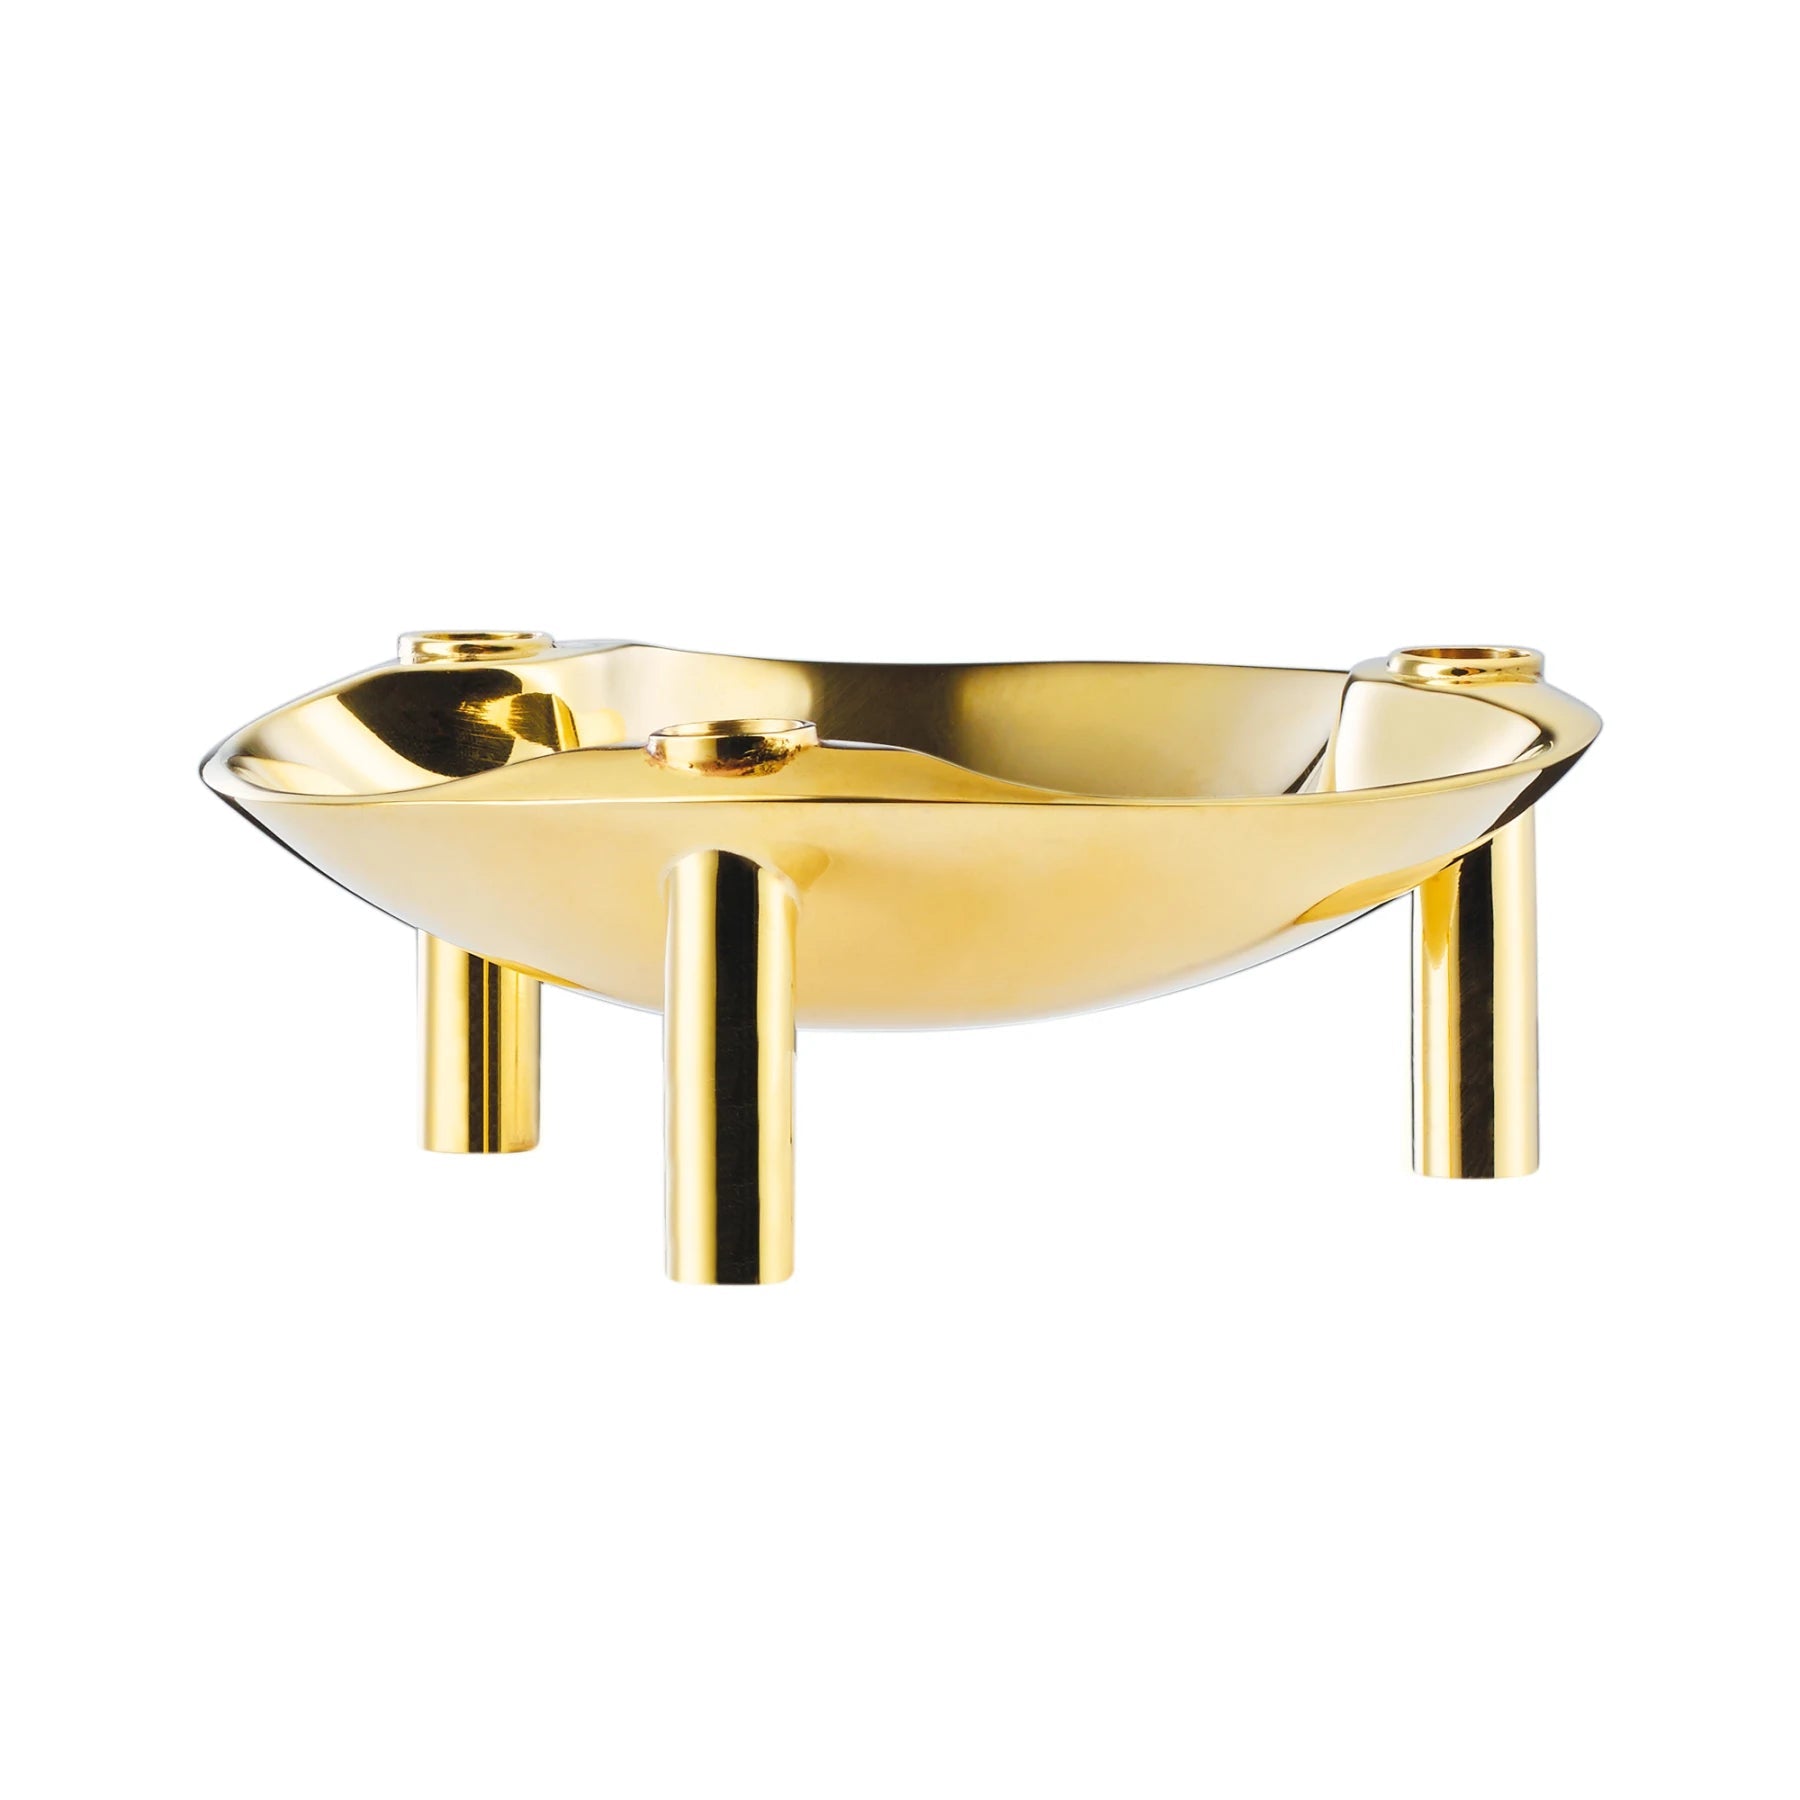 STOFF NAGEL brass candle holder and bowl